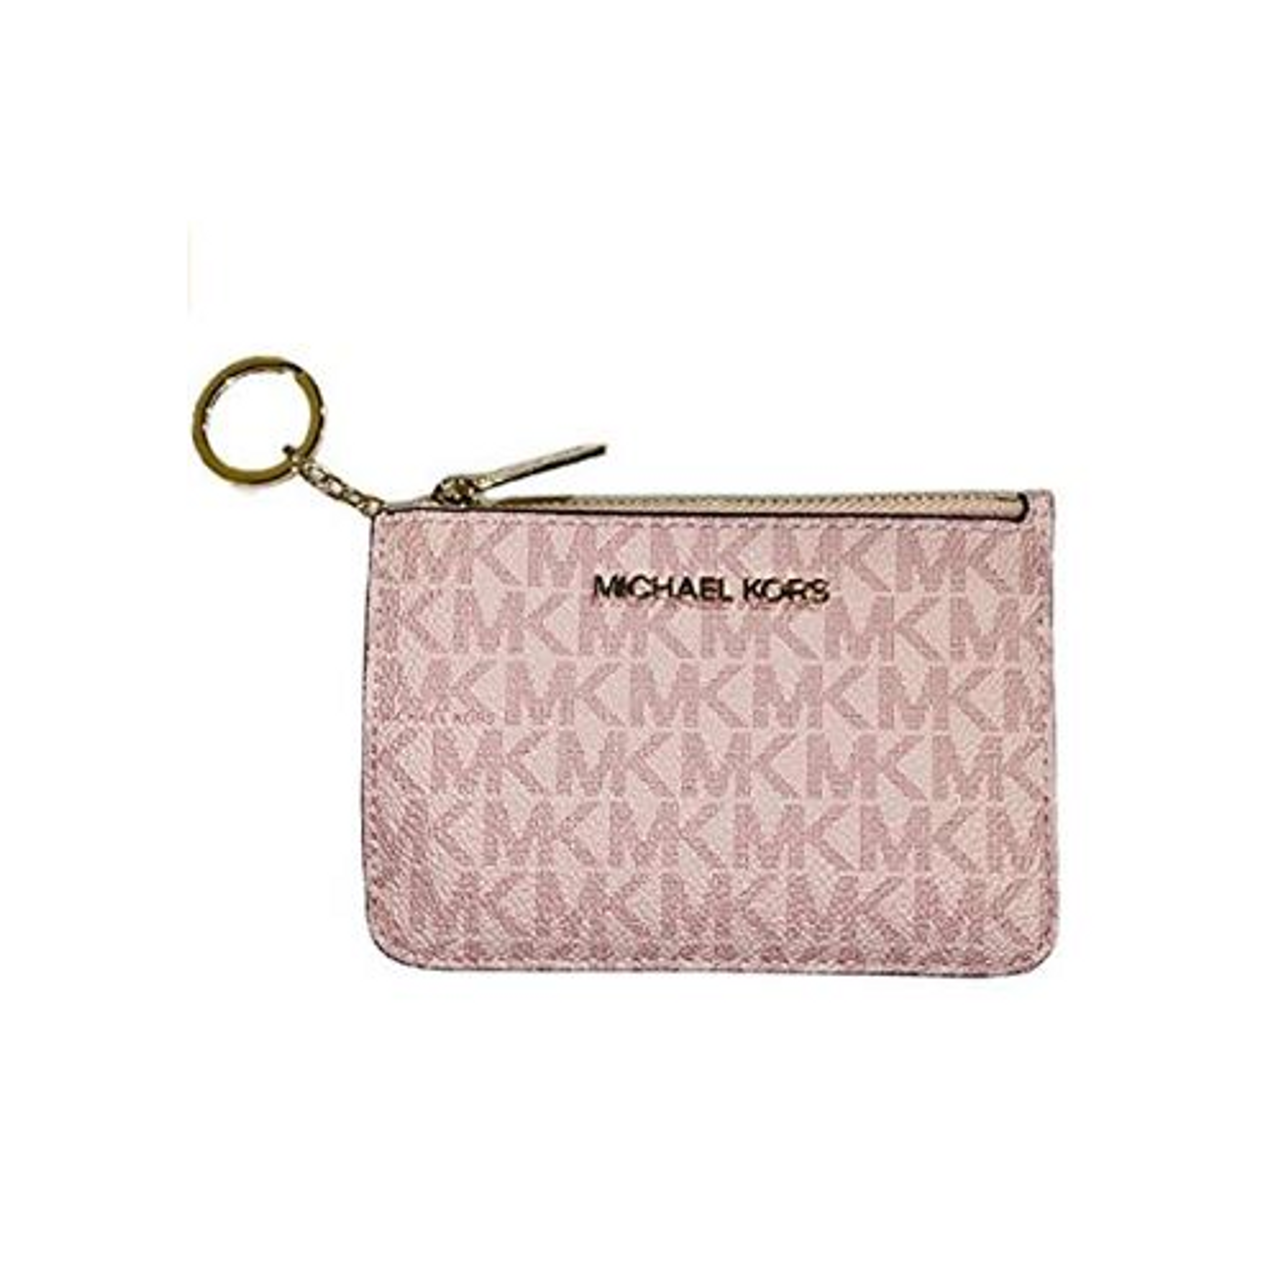 MK Gdledy Mini Wallet Coin Purse with Clasp Bag Pendant - Brown Wallet 